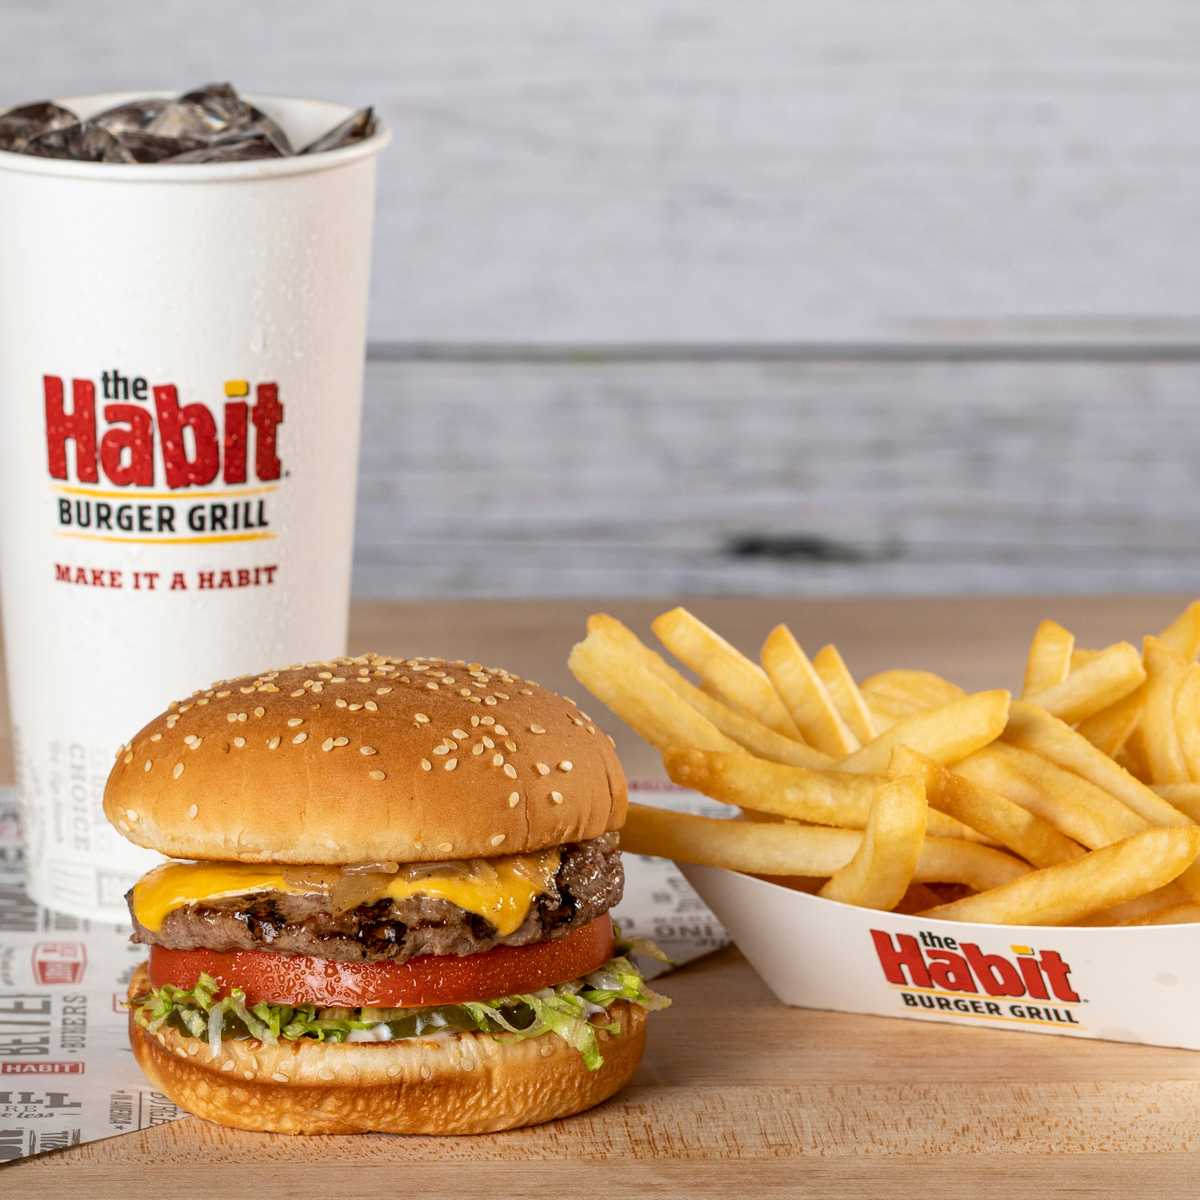 The Habit Burger Grill Delivery Takeout 390 West El Camino Real Sunnyvale Menu Prices Doordash